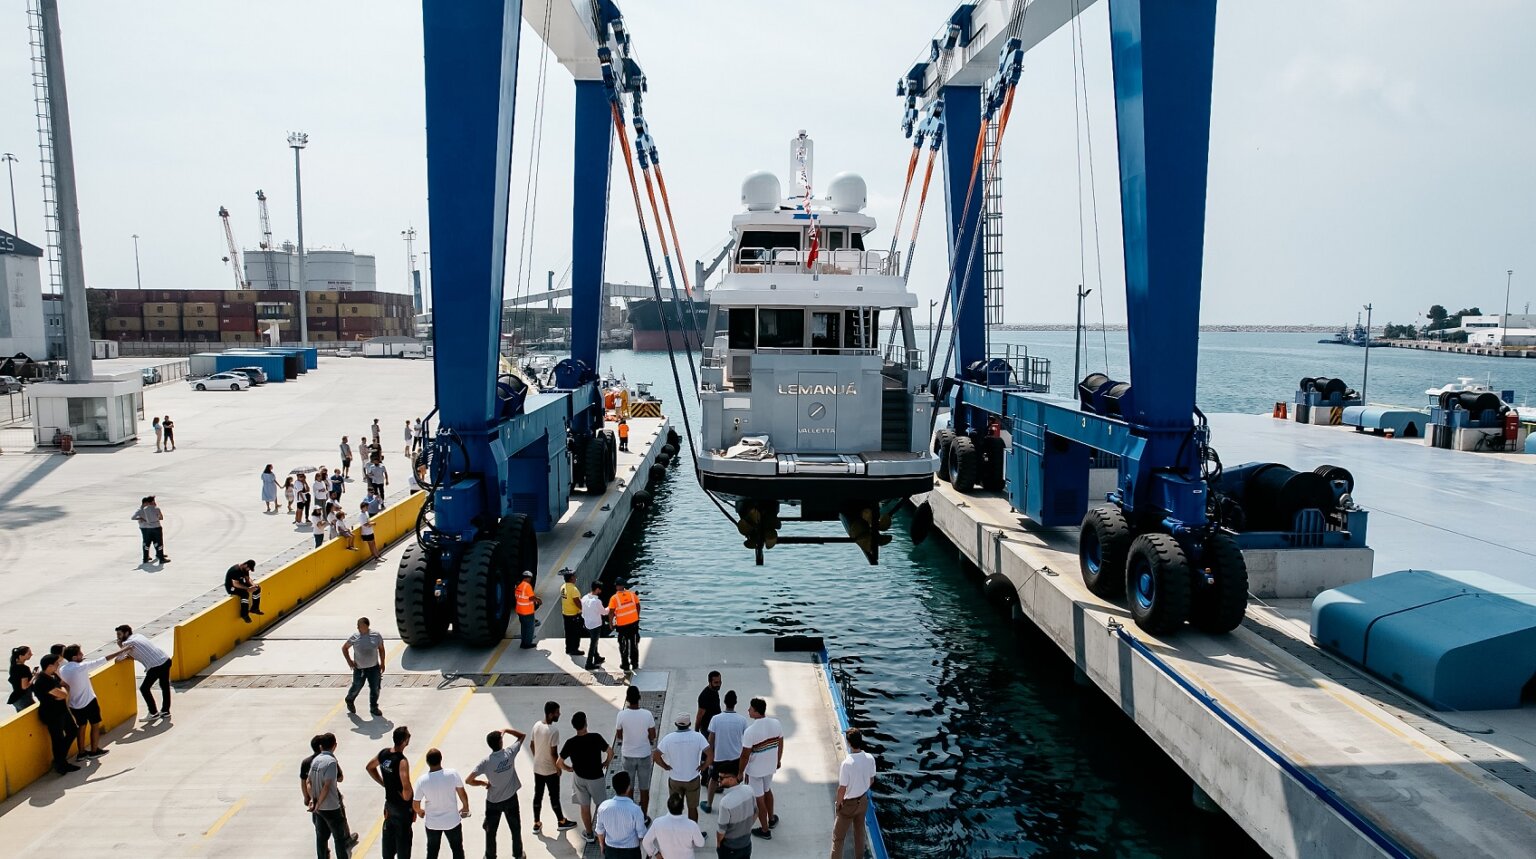 Lemanja yacht being launched onto the water